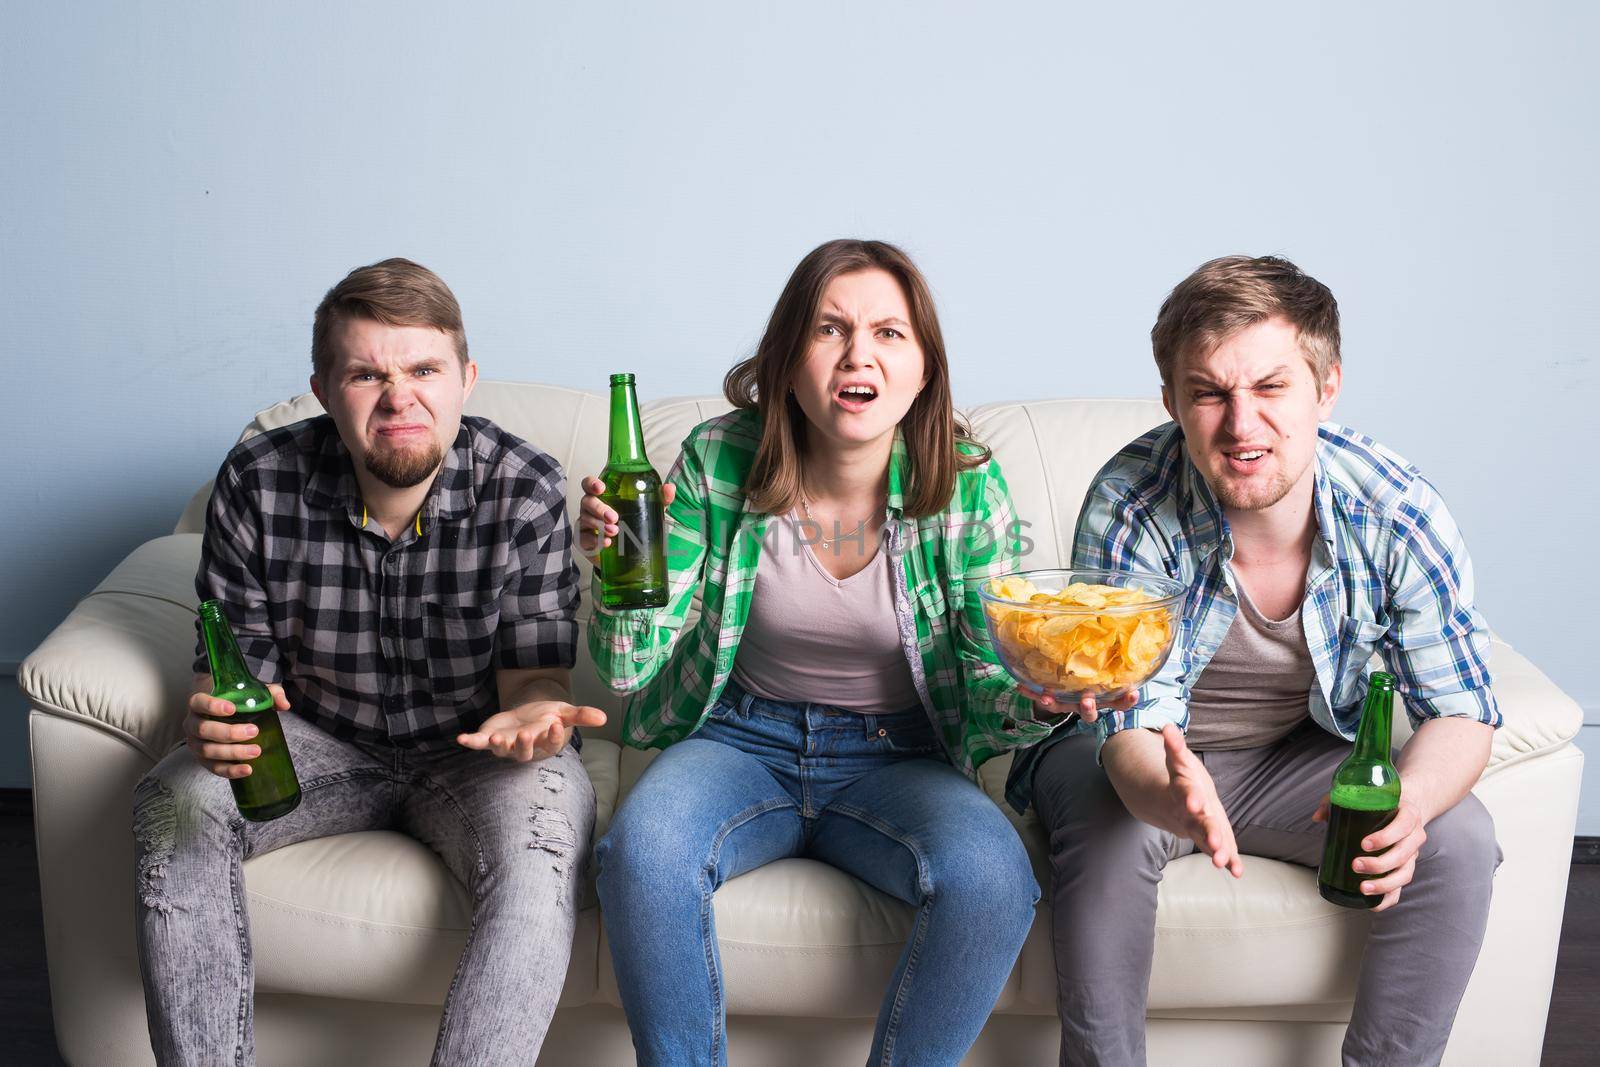 Group of friends watching sport together, Young men drink beer